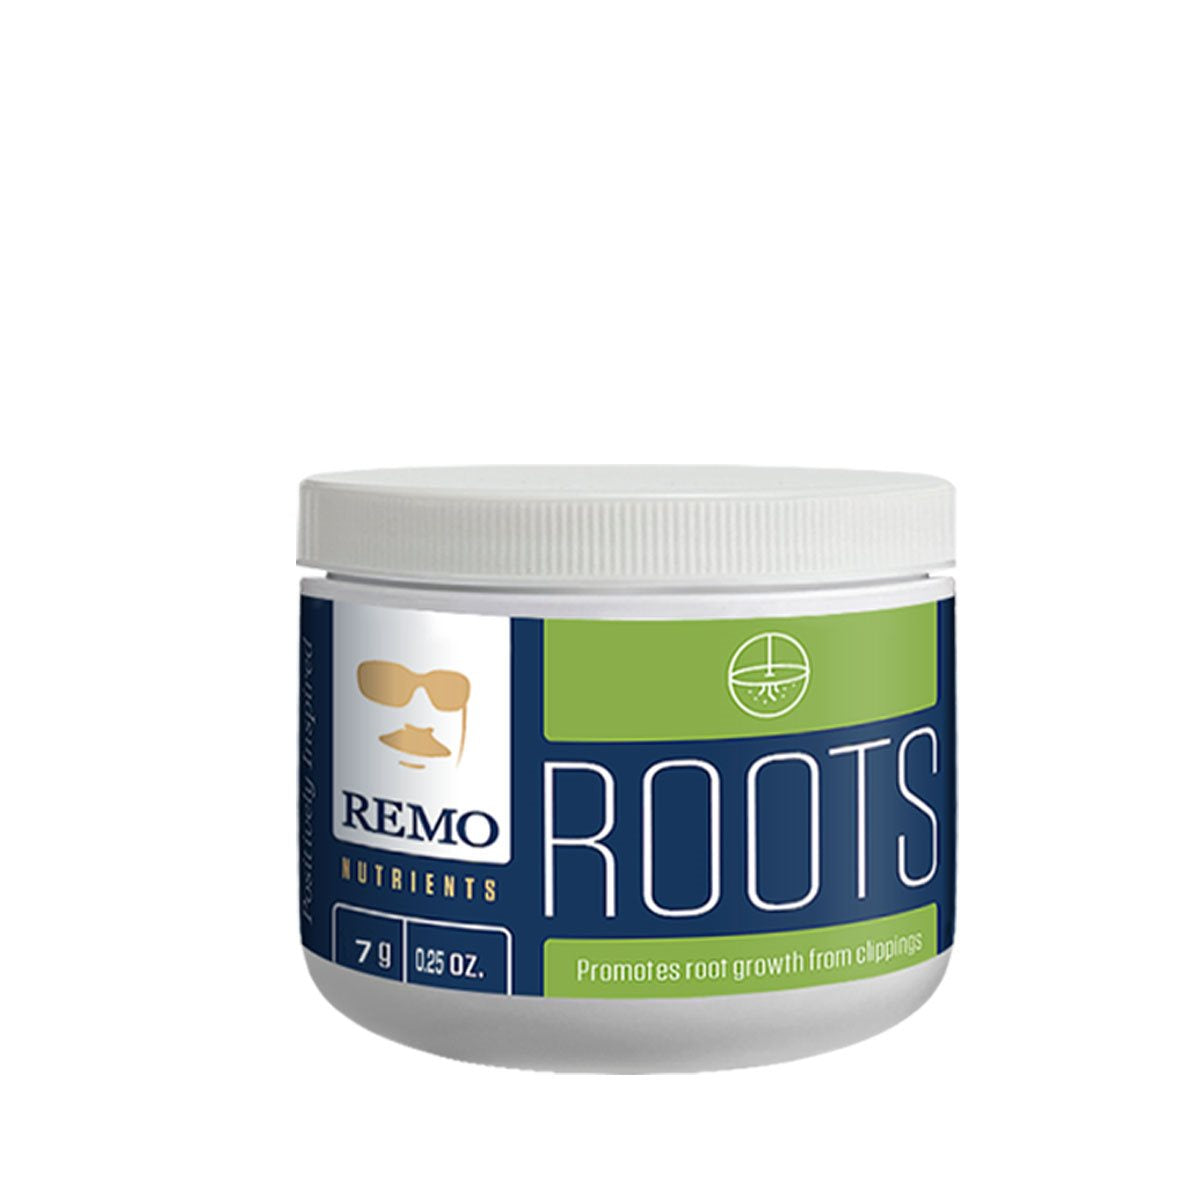 Remo Roots 7 gram